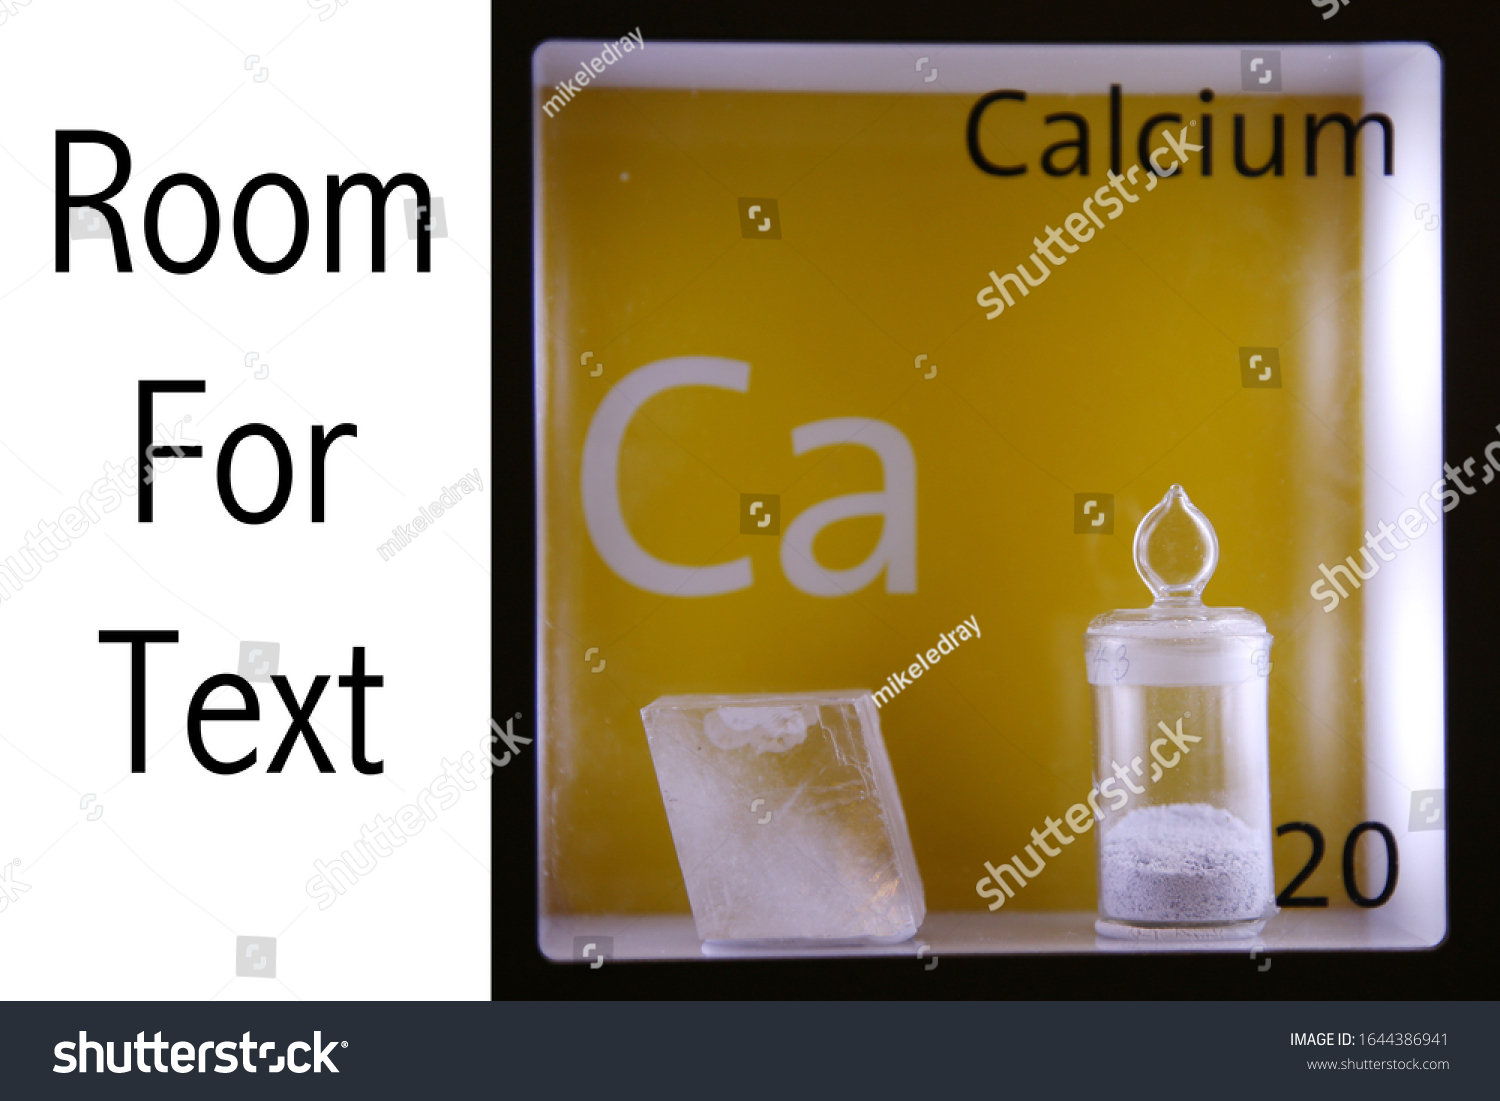 element examples science